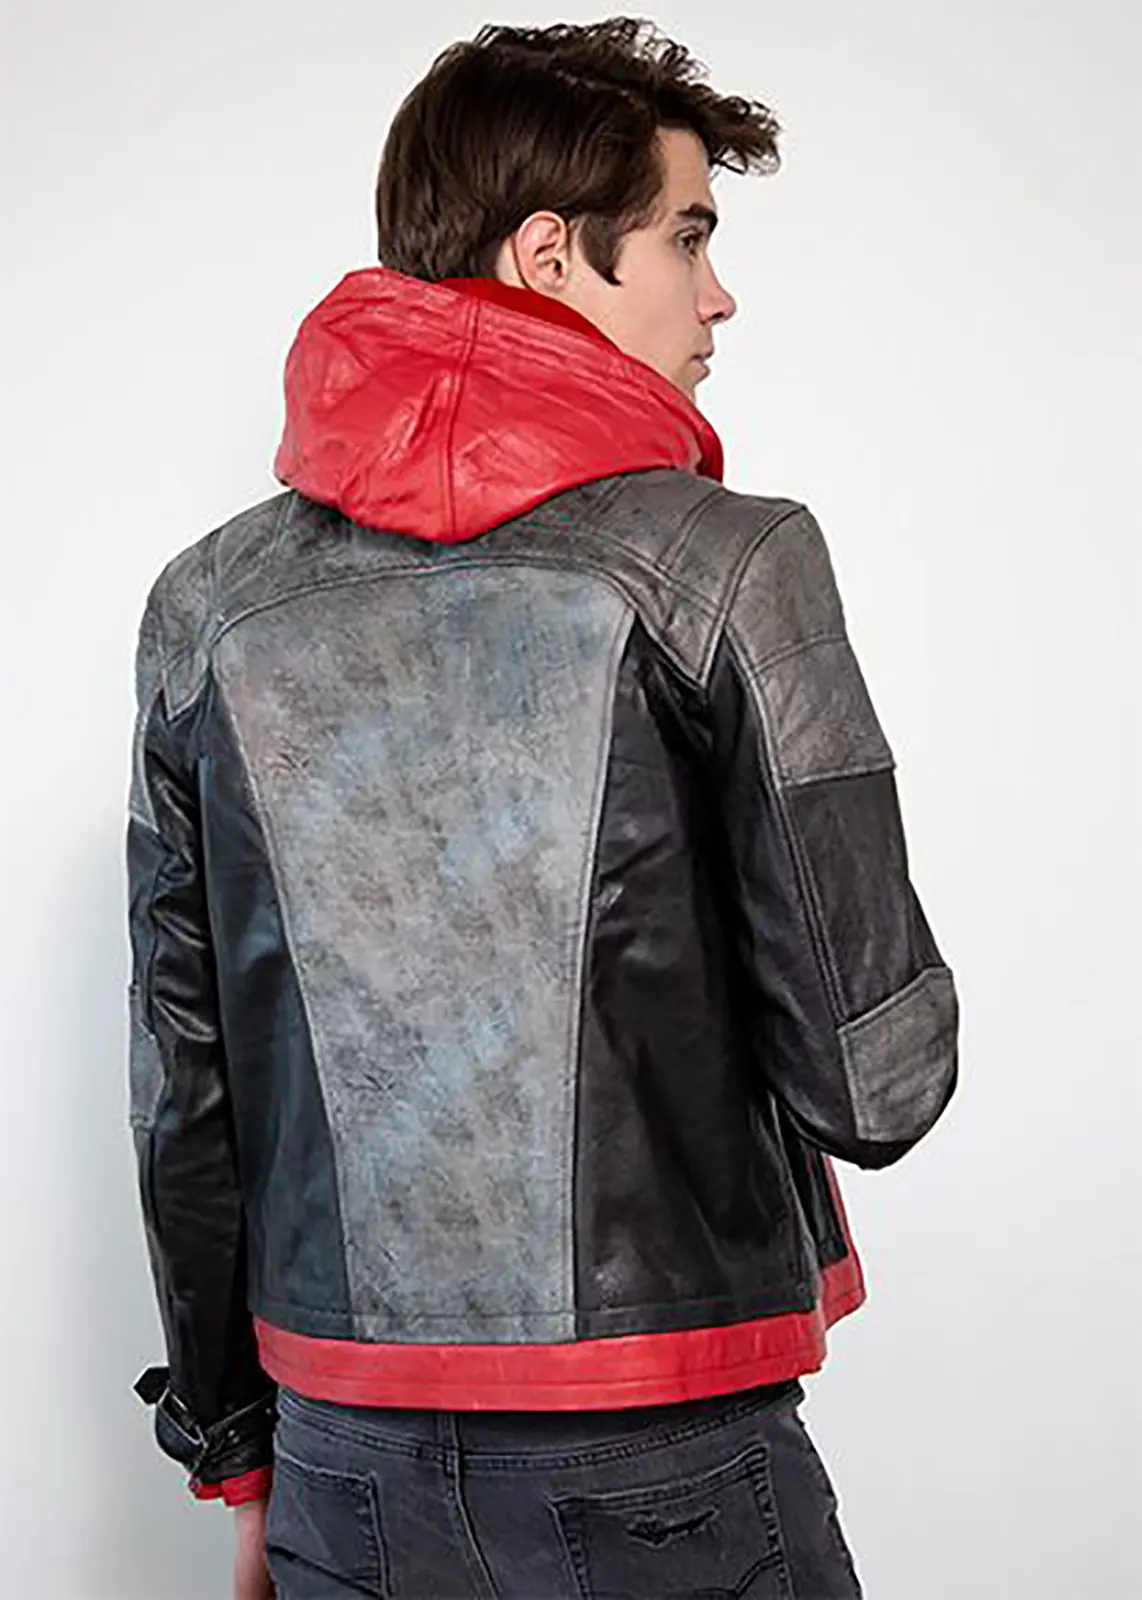 red hood jacket without logo